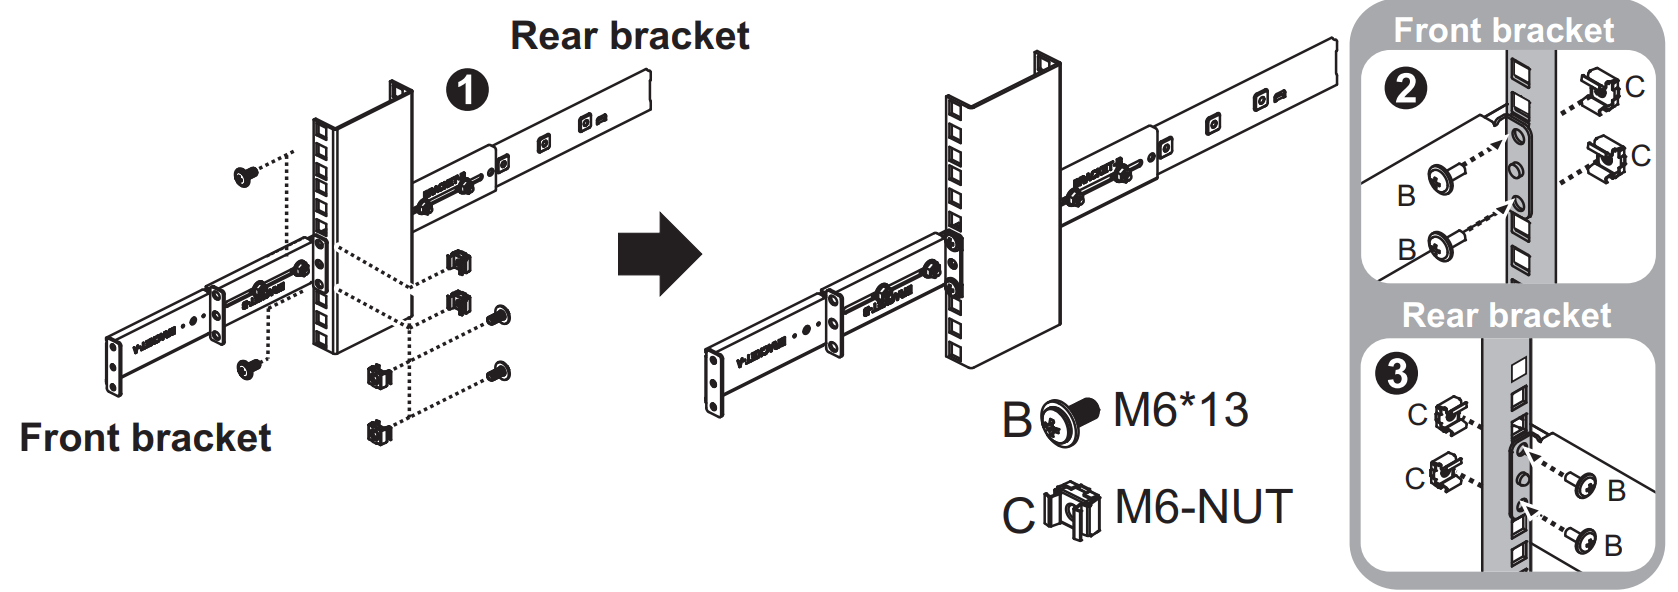 Instructions for front and rear brackets.